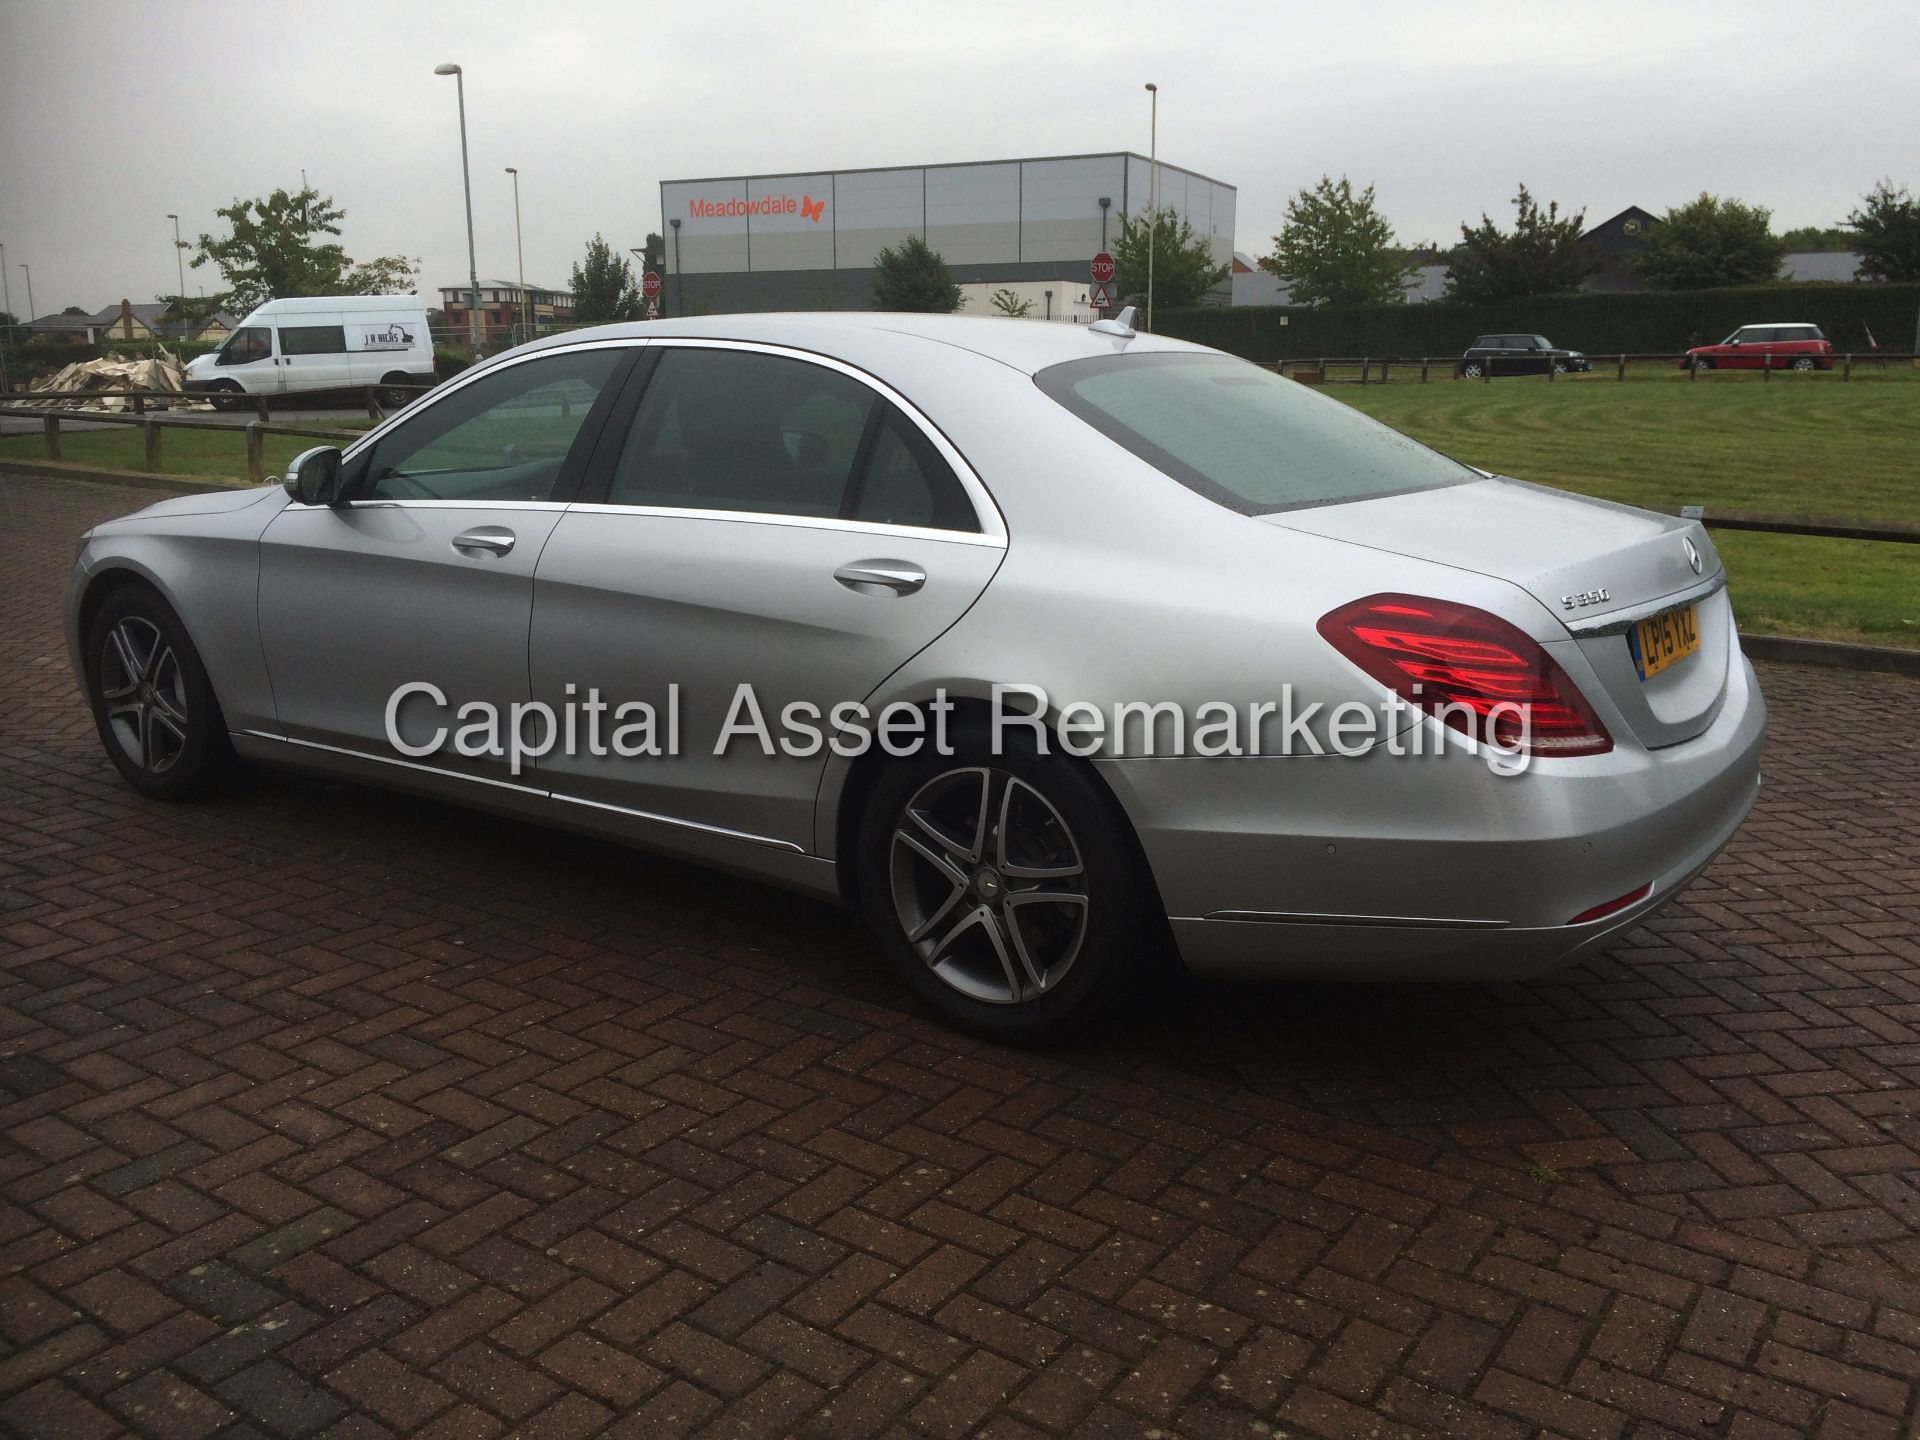 (ON SALE) MERCEDES S350CDI "LIMO - SE EXCLUSIVE" FULLY LOADED (15 REG - NEW SHAPE -ADD BLUE) COMMAND - Image 8 of 32